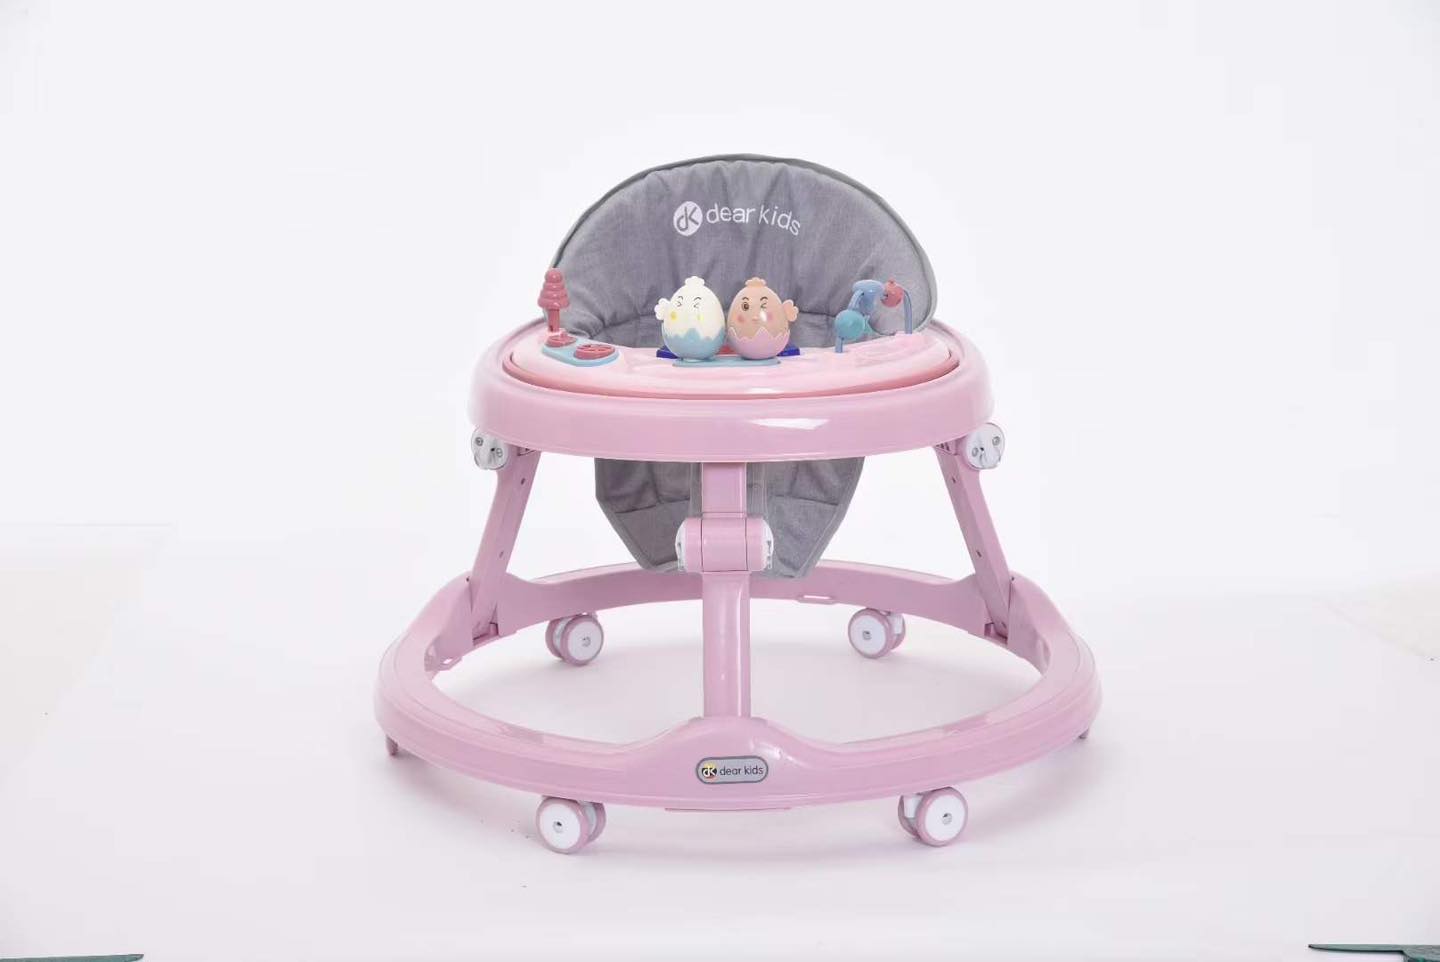 Adjustable and Safe Baby Walker for Learning to Walk - Pink